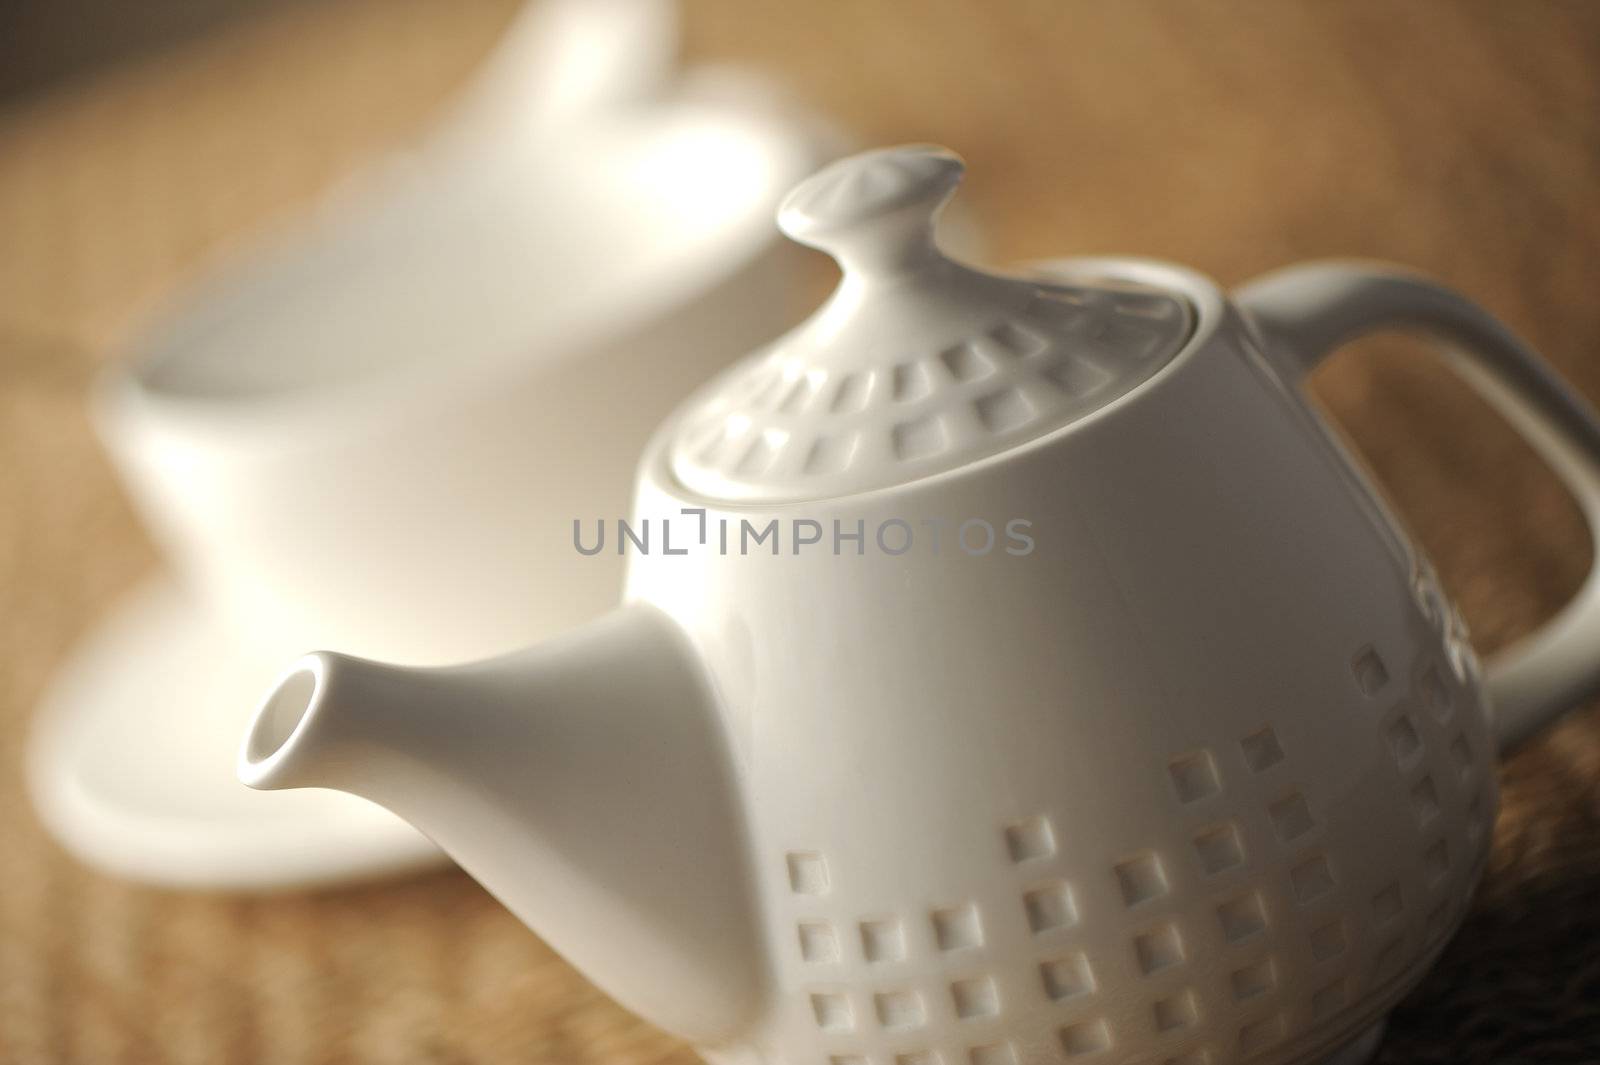 teapot on table, close up, shallow dof